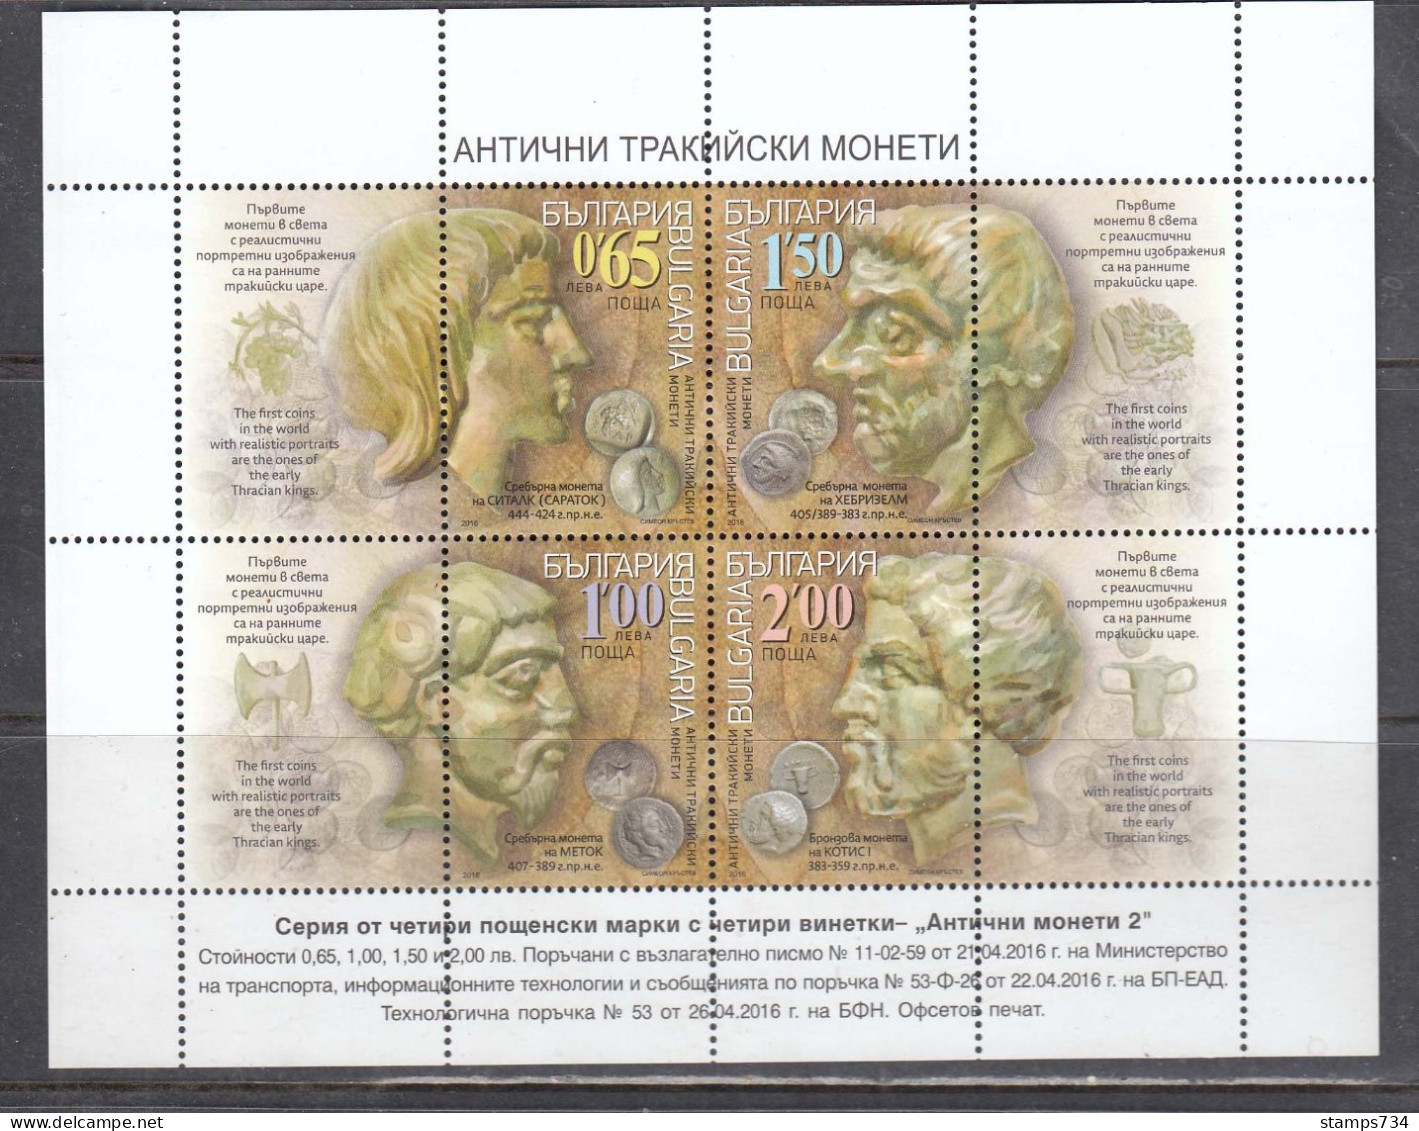 Bulgaria 2016 - Tracian Coins, Mi-Nr. 5261/64 In Sheet, MNH** - Unused Stamps